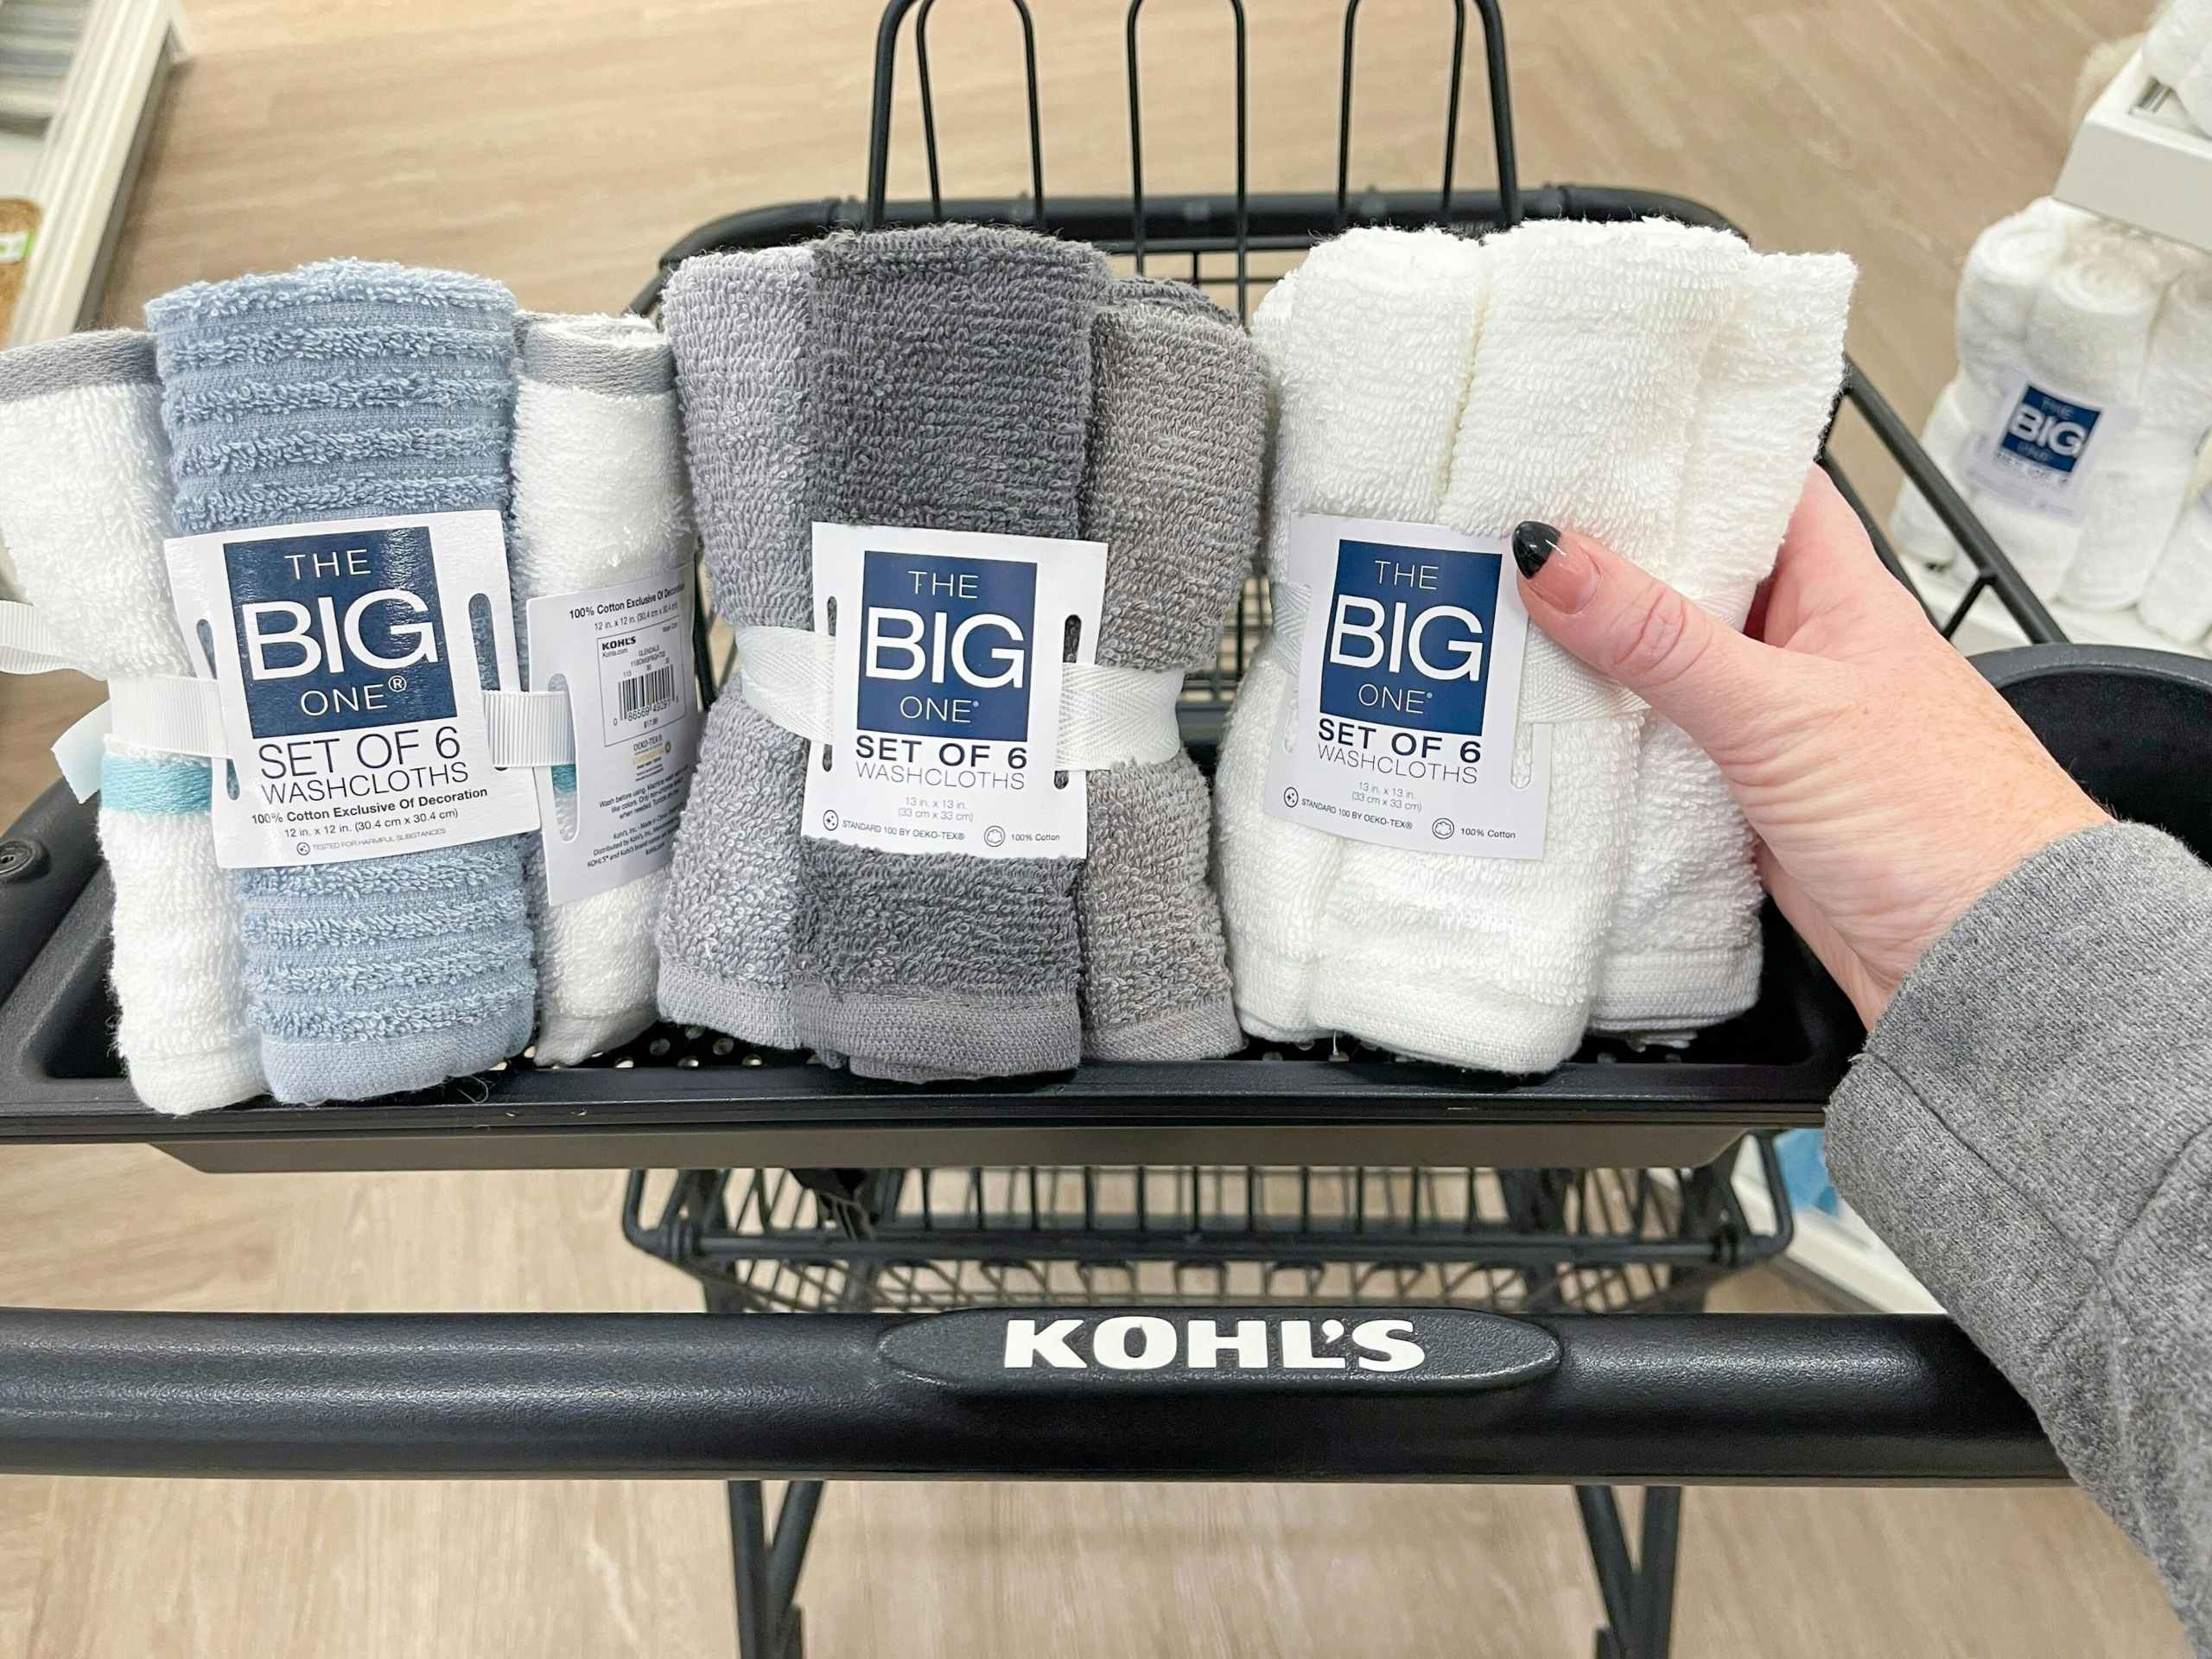 kohls the big one washcloth 6 pack in store image 2022